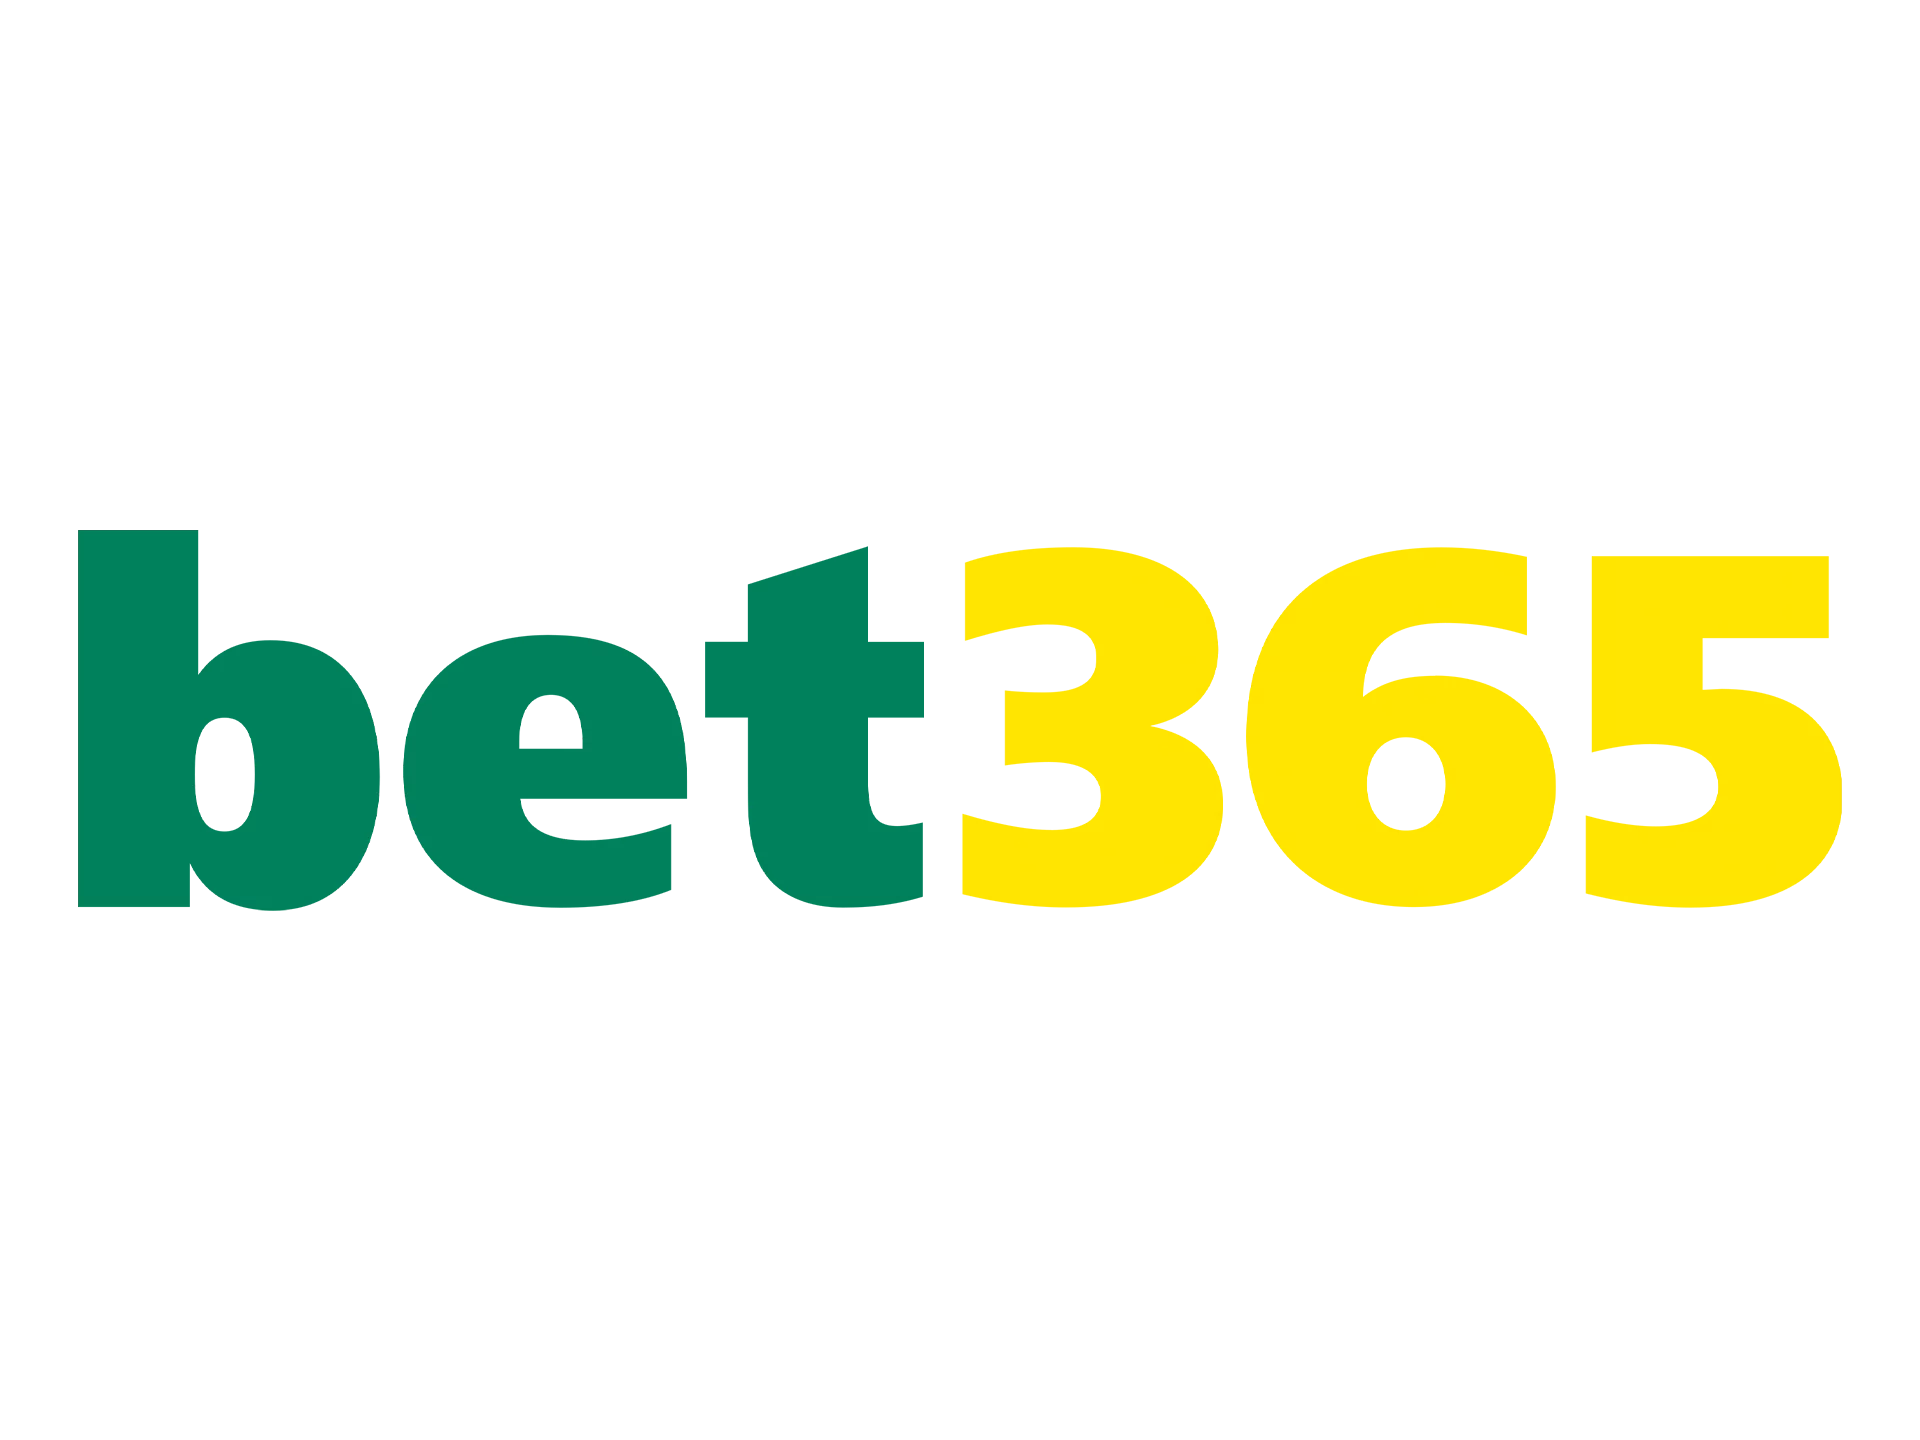 Watch an expert video review of Bet365 for Indian users.